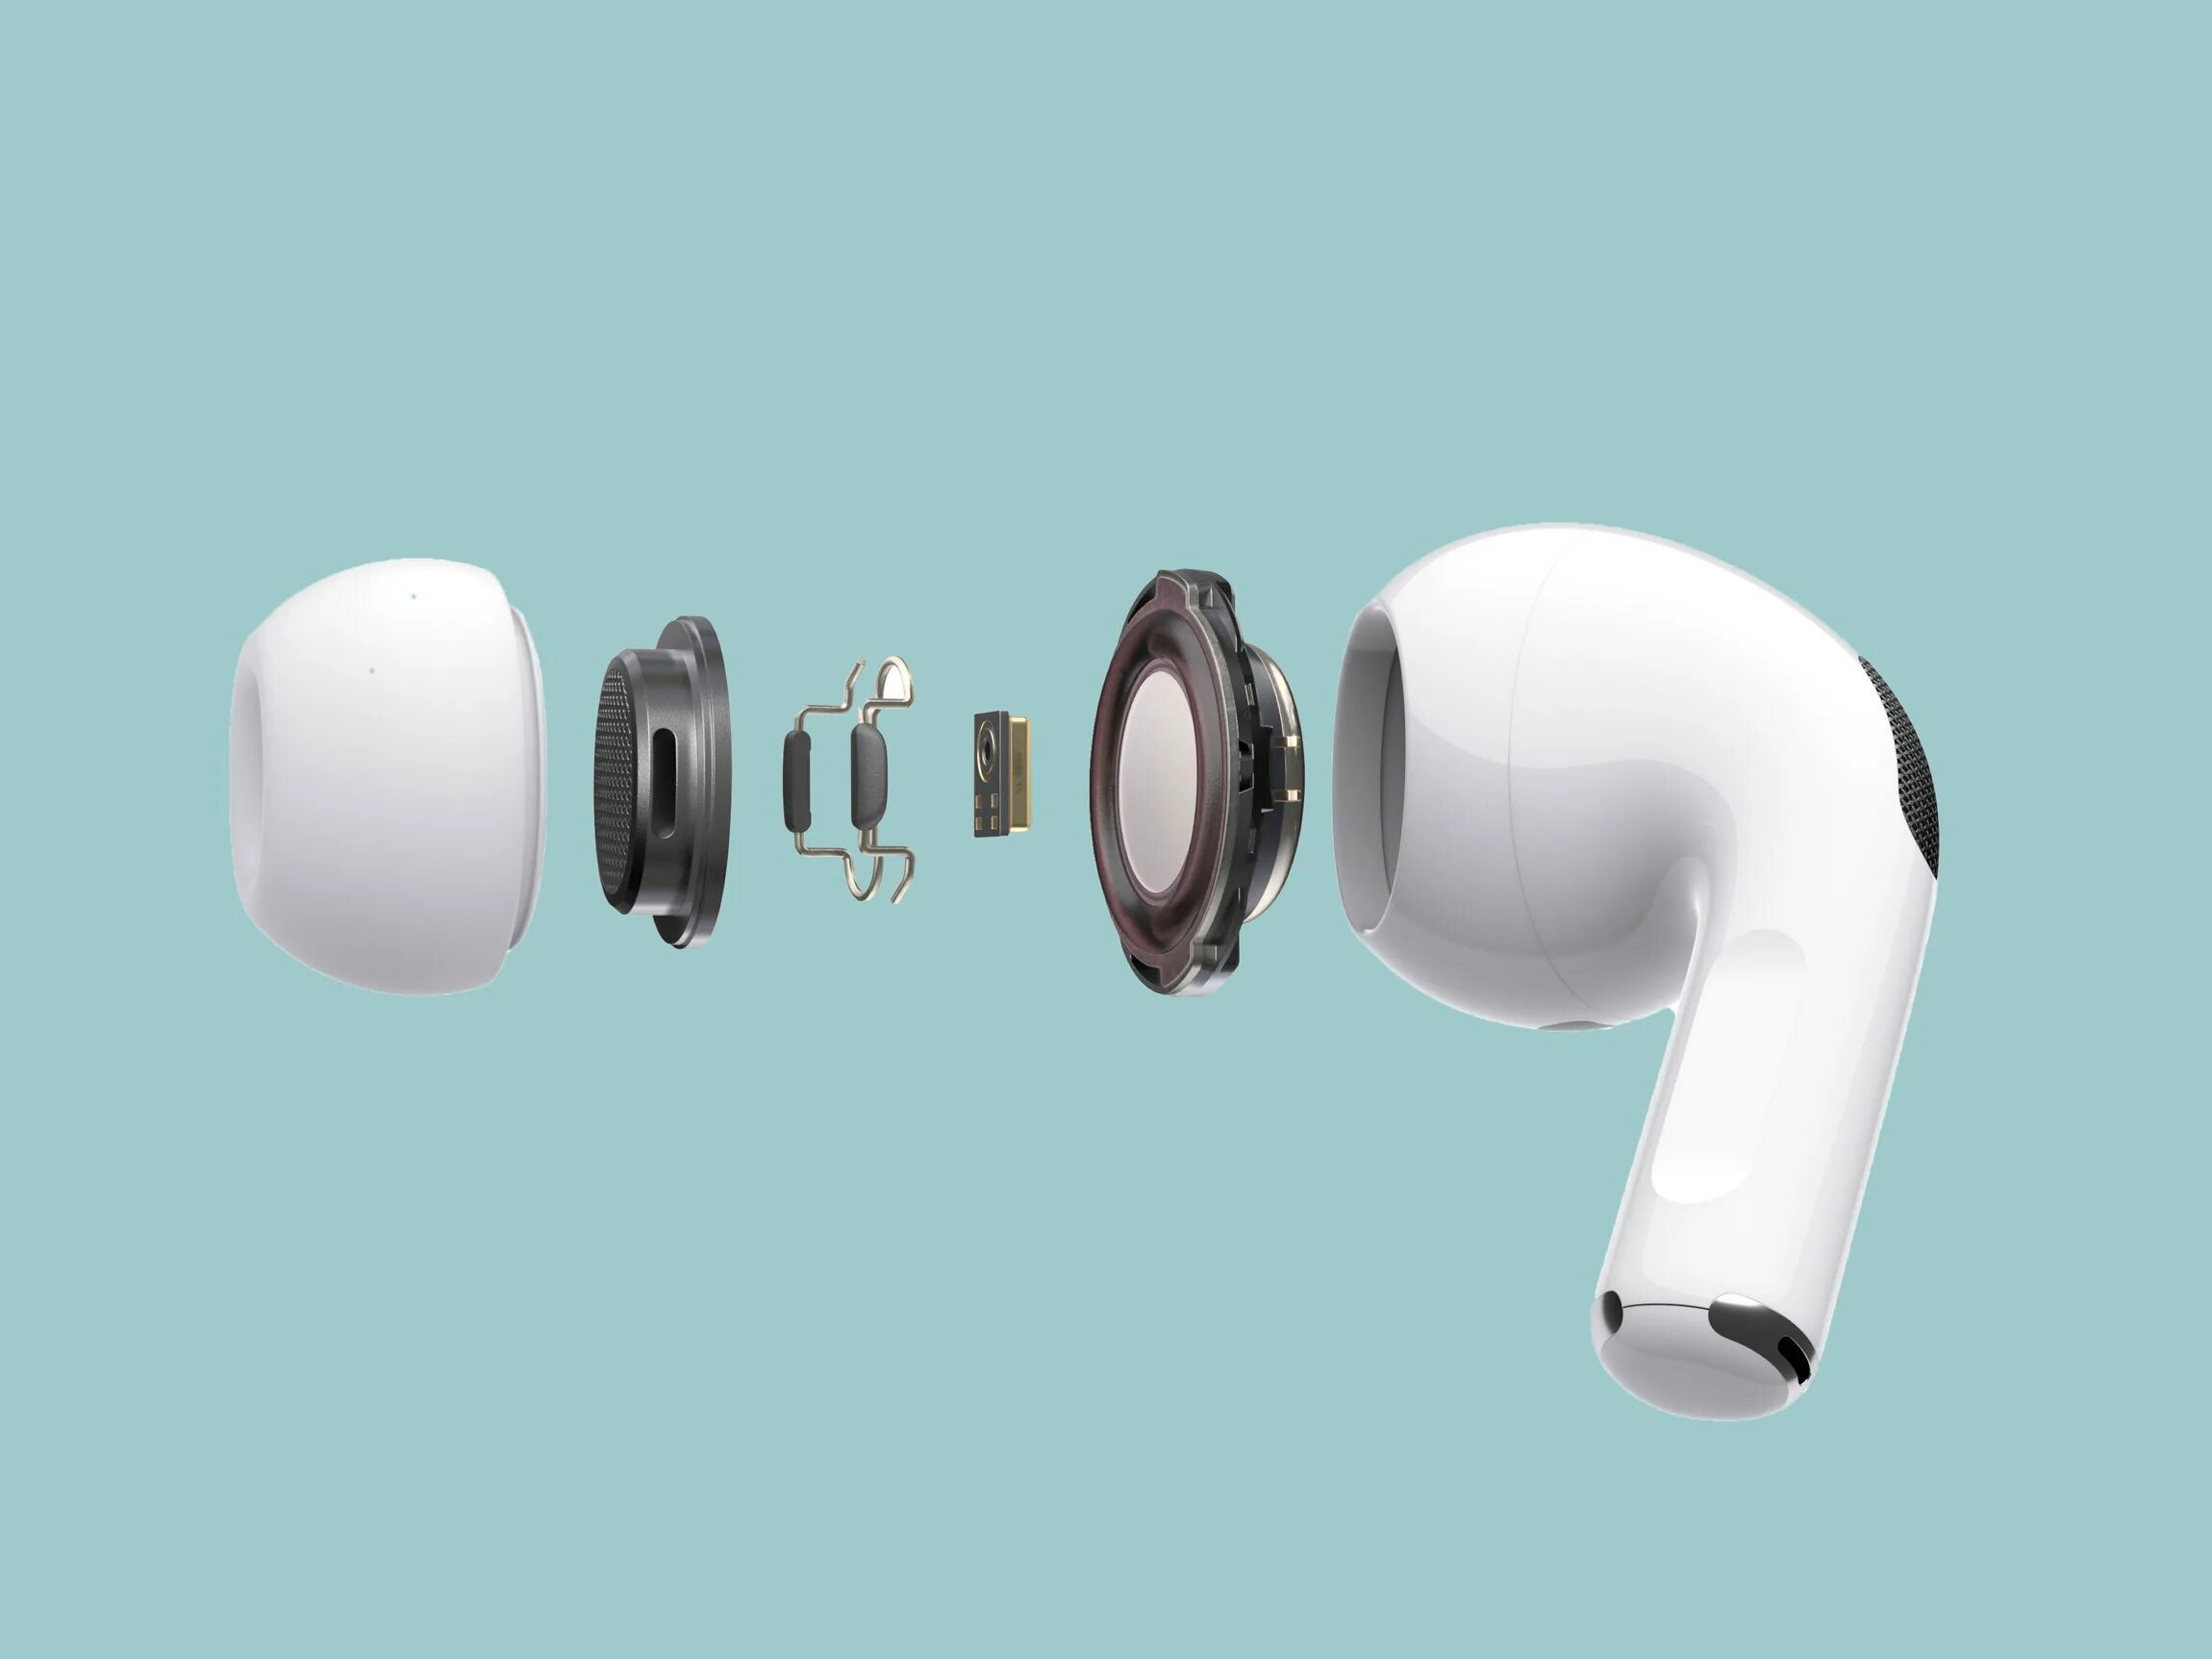 Airpods звучание. AIRPODS Pro 2 внутри. Разбор корпуса AIRPODS Pro. Apple AIRPODS Pro разбор. Внутри наушника Air pods 3.